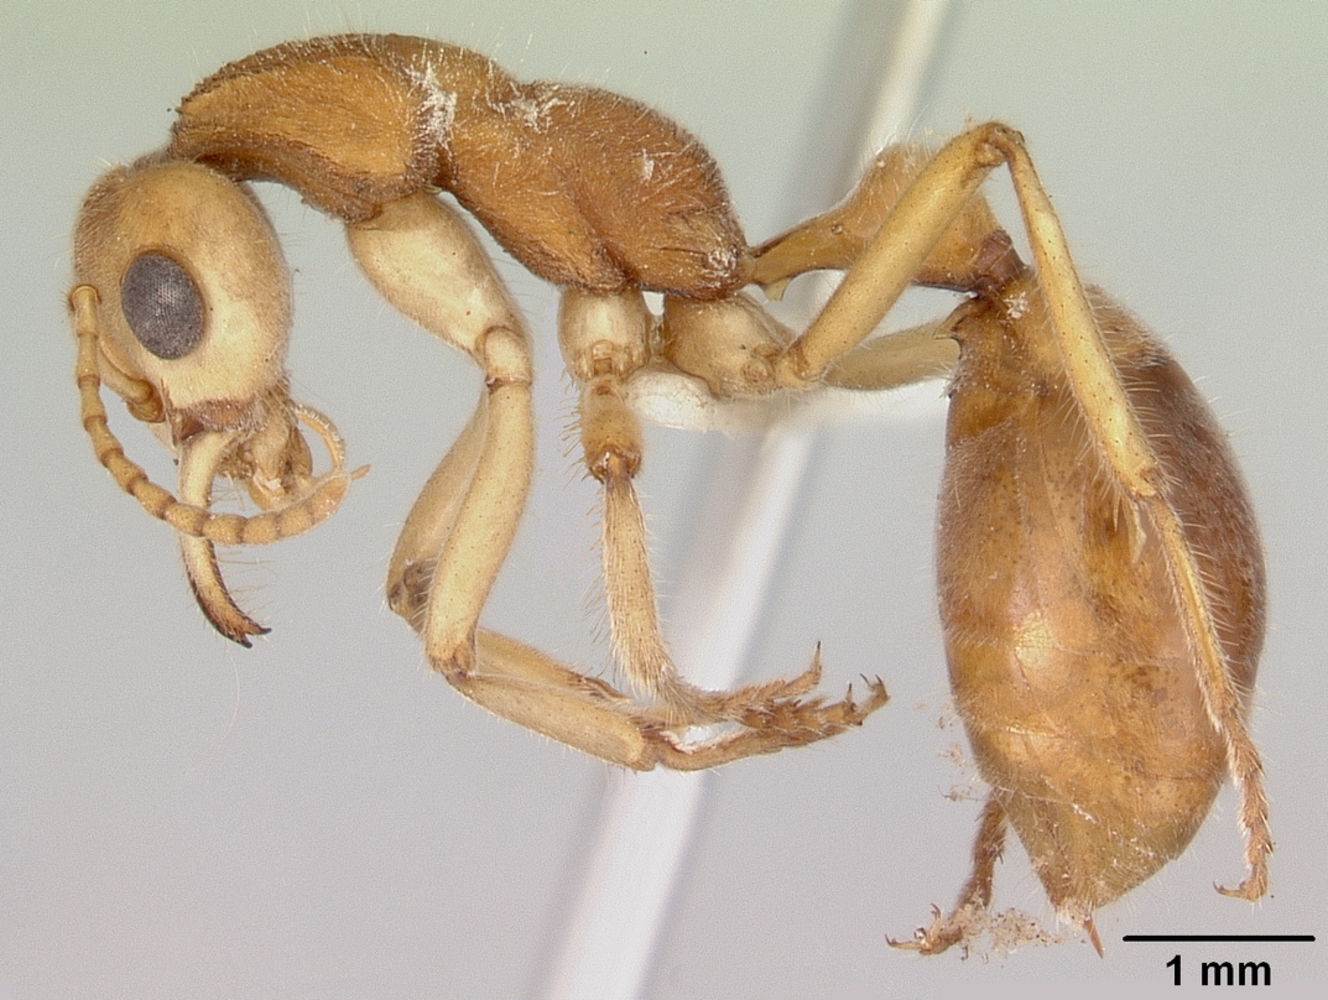 Profile view of the Dinosaur Ant - Nothomyrmecia macrops